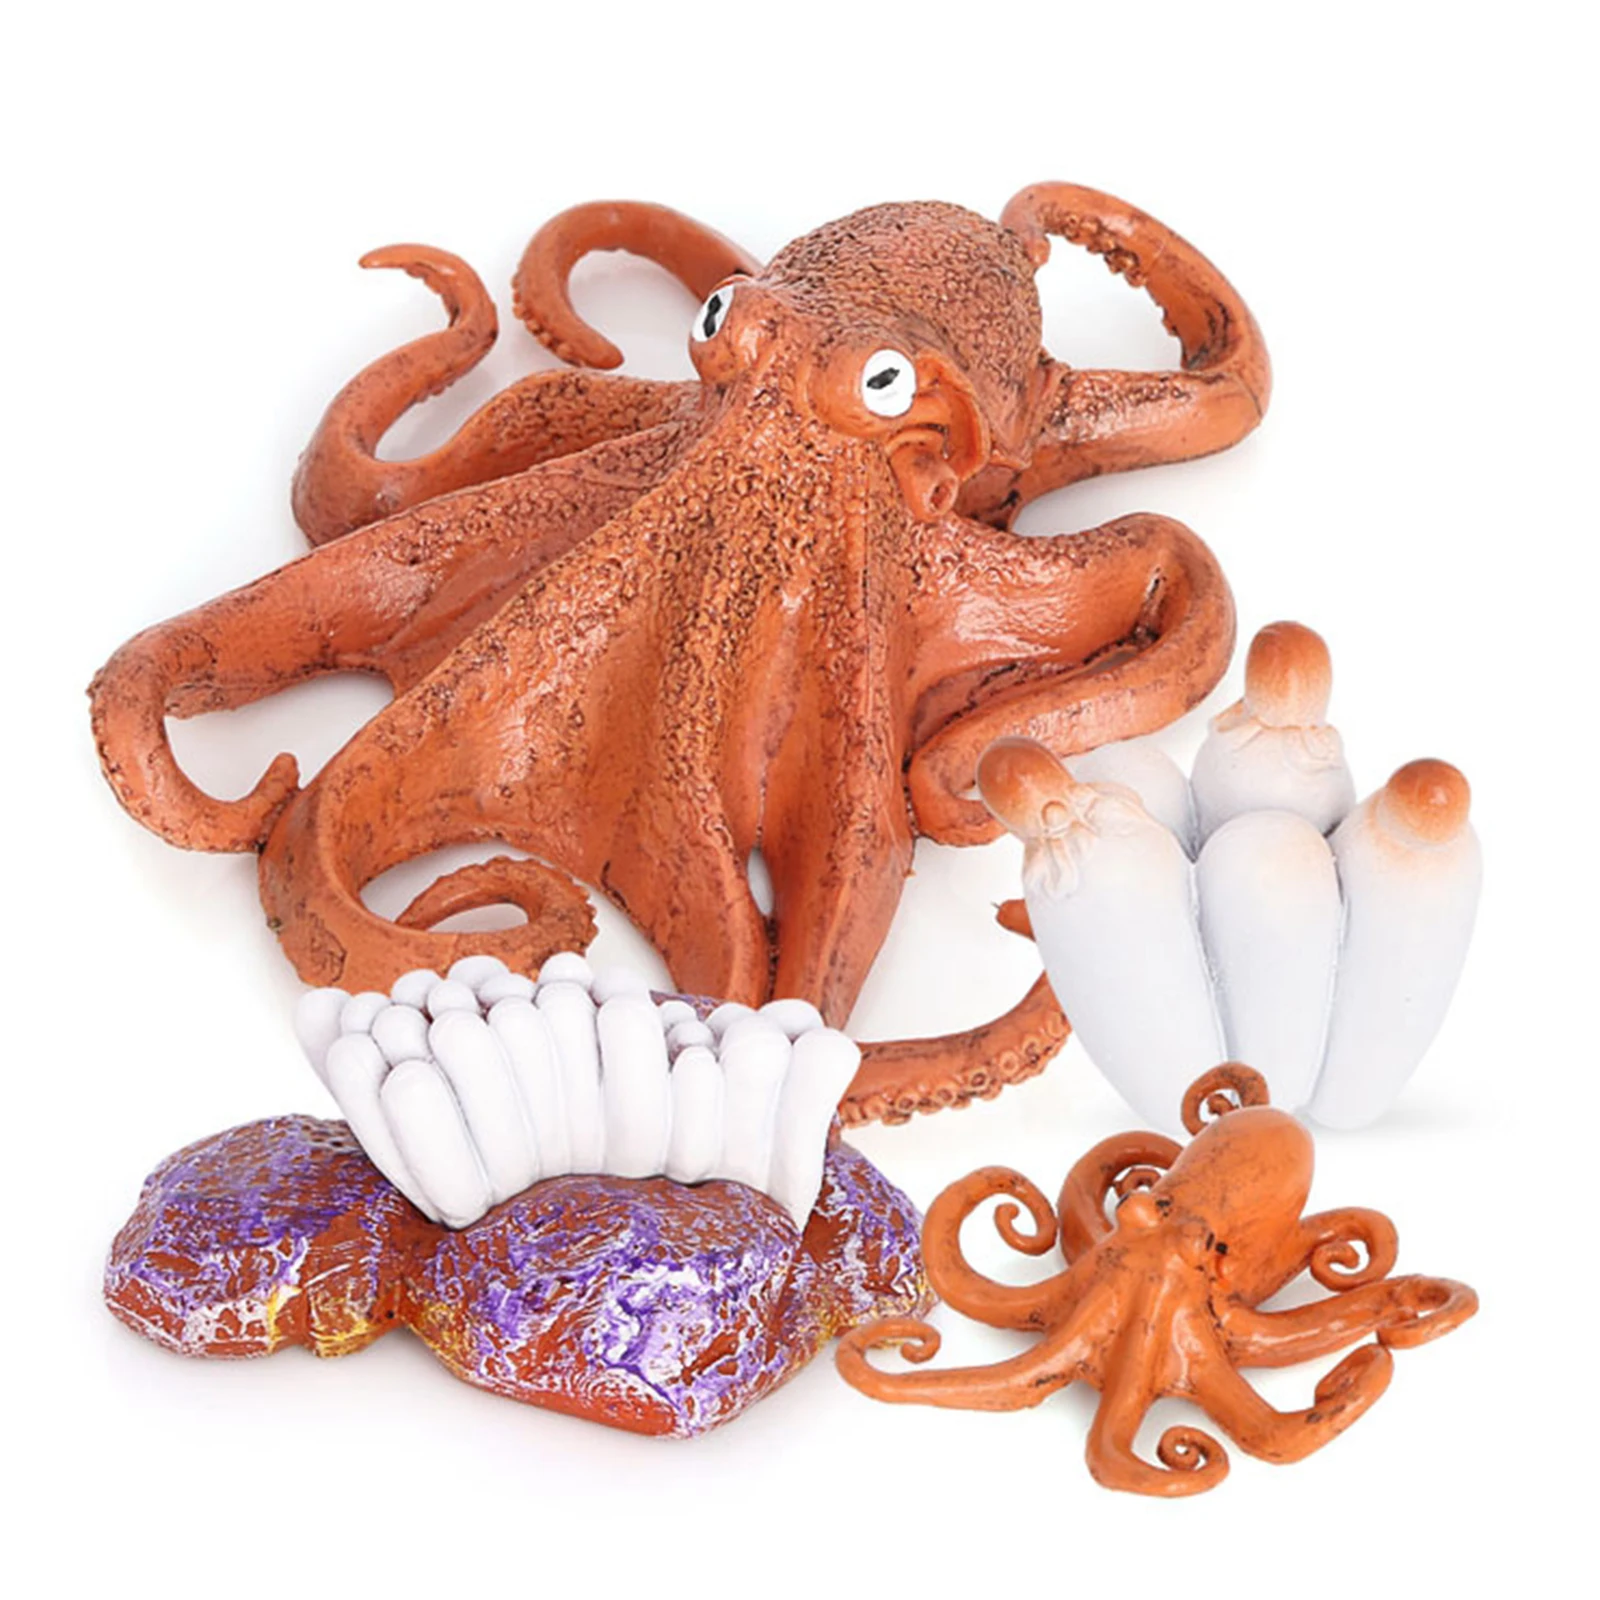 Realistic Life Cycle of a Octopus 4 Separate Pieces Growth Cycle Model Figurines Miniature Decor Collector Kids Educational Toys